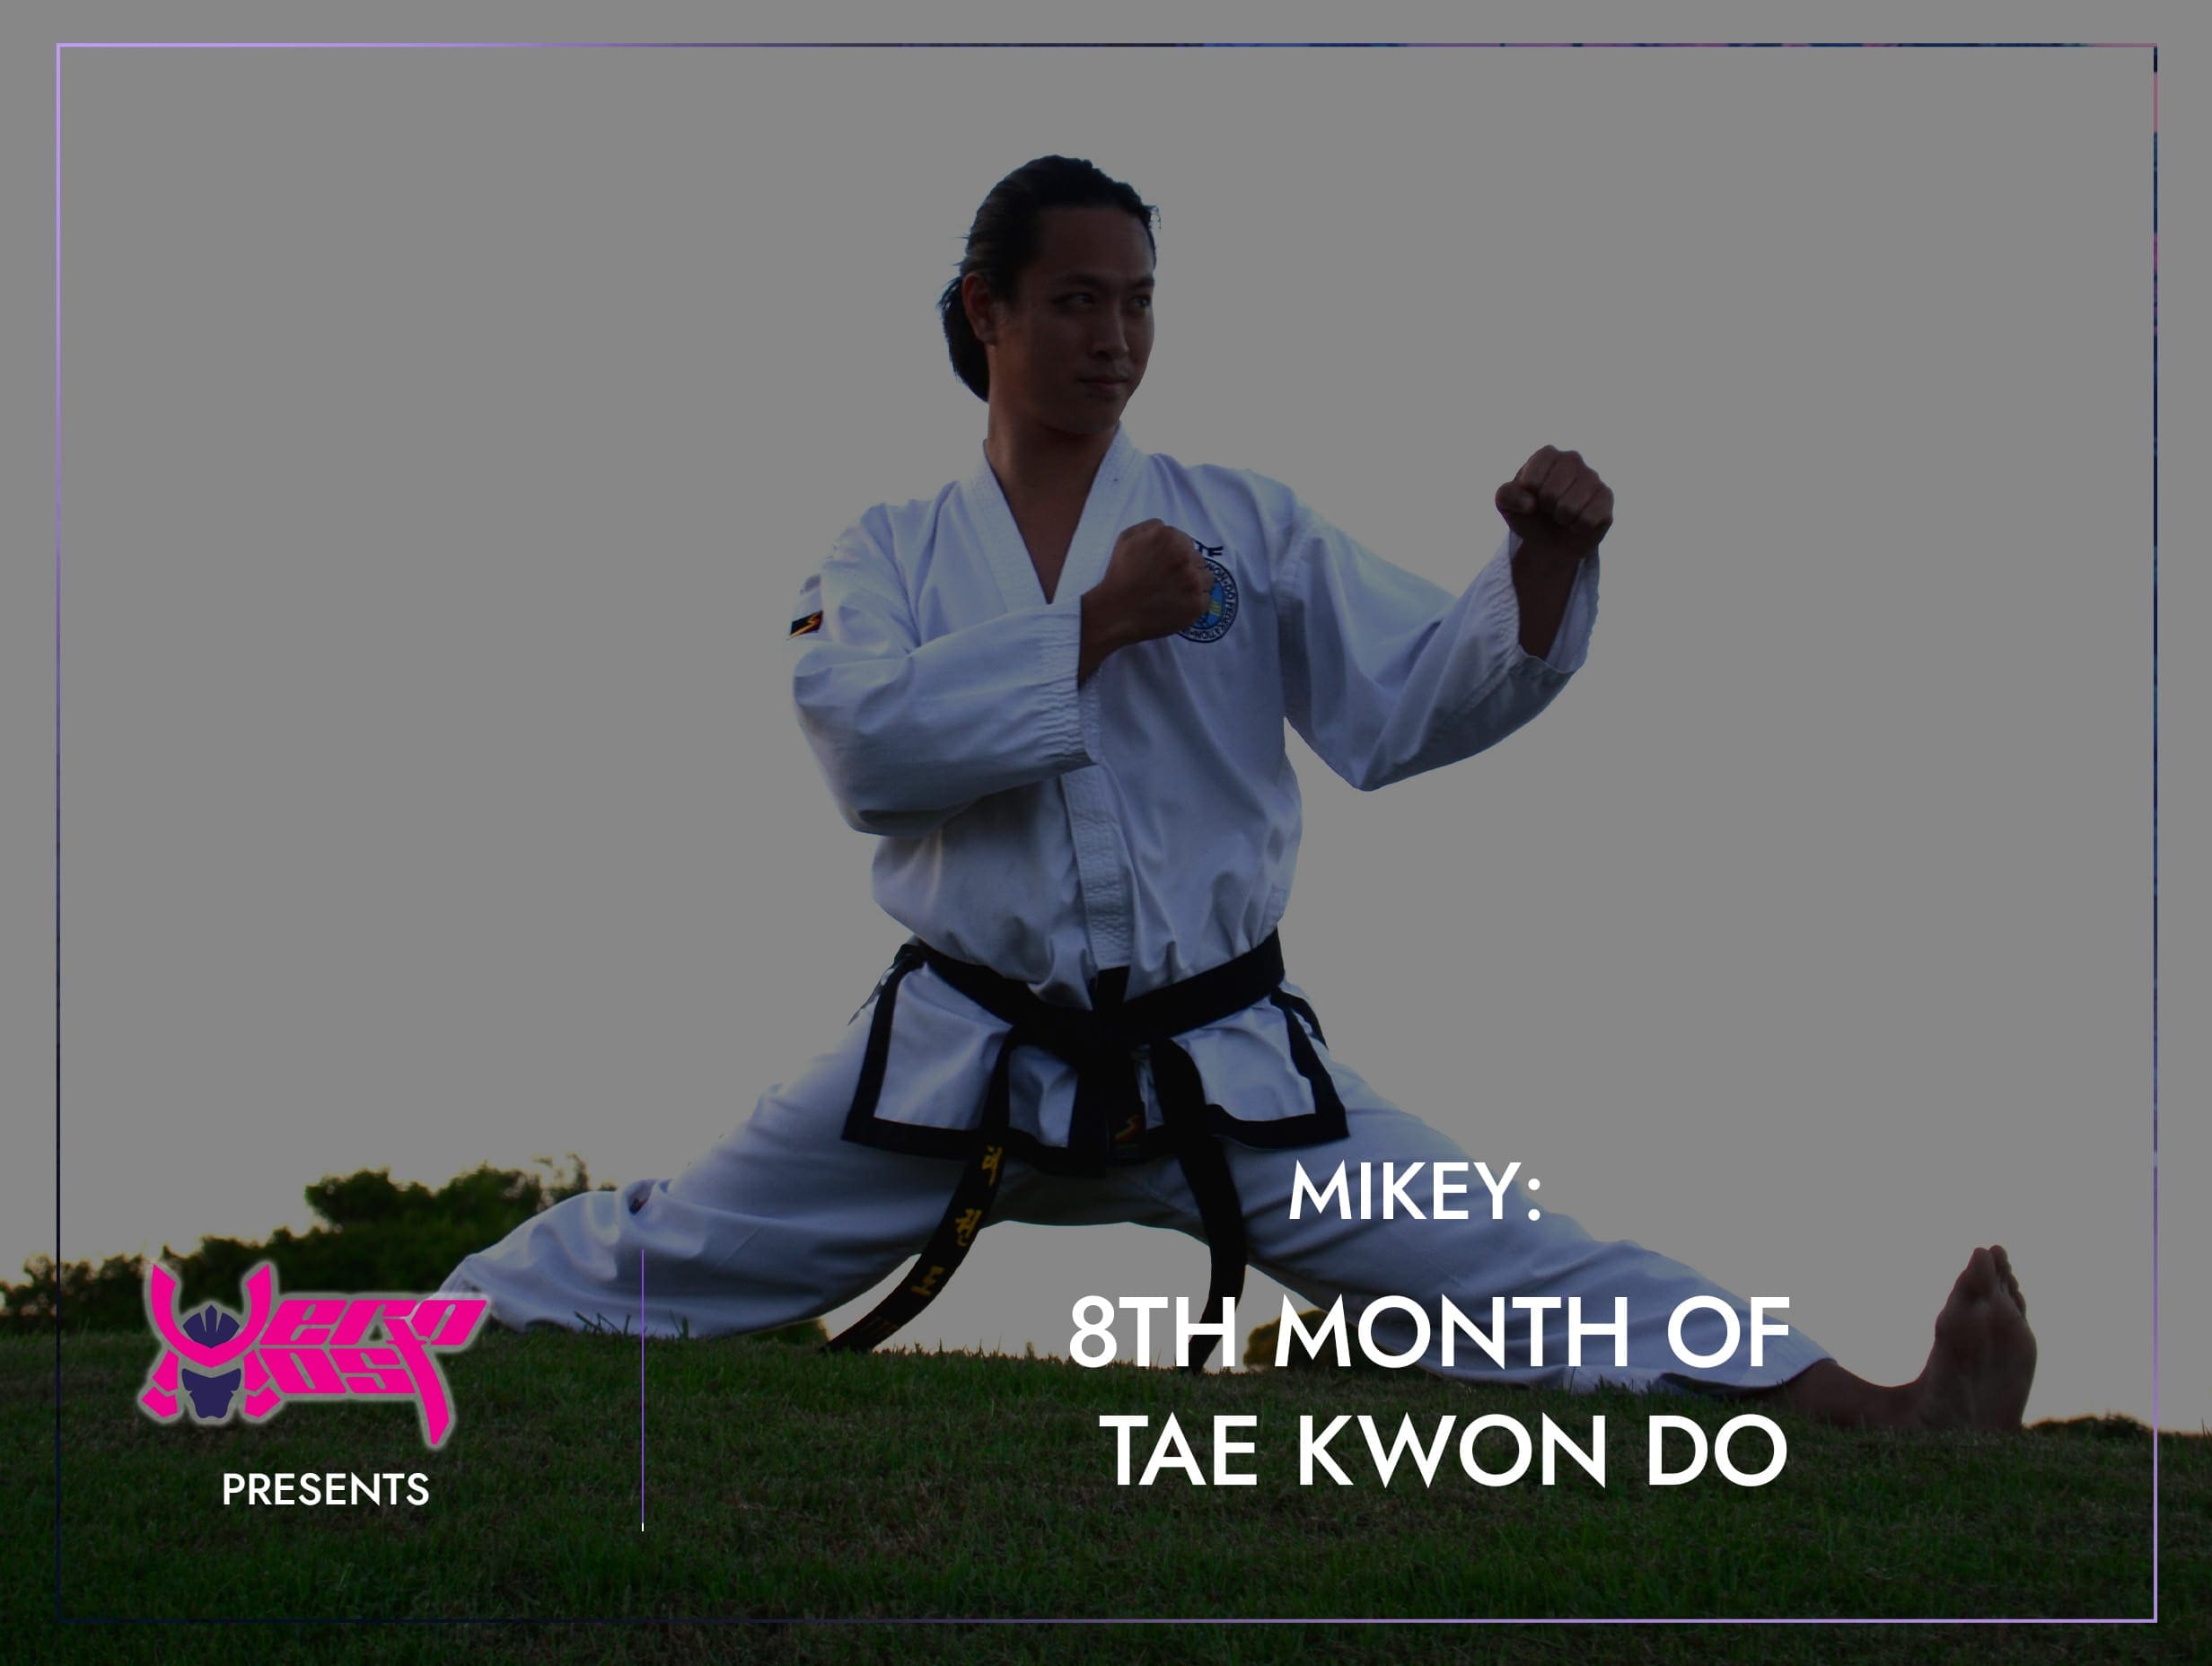 Mikey - 8th Month of Tae Kwon Do